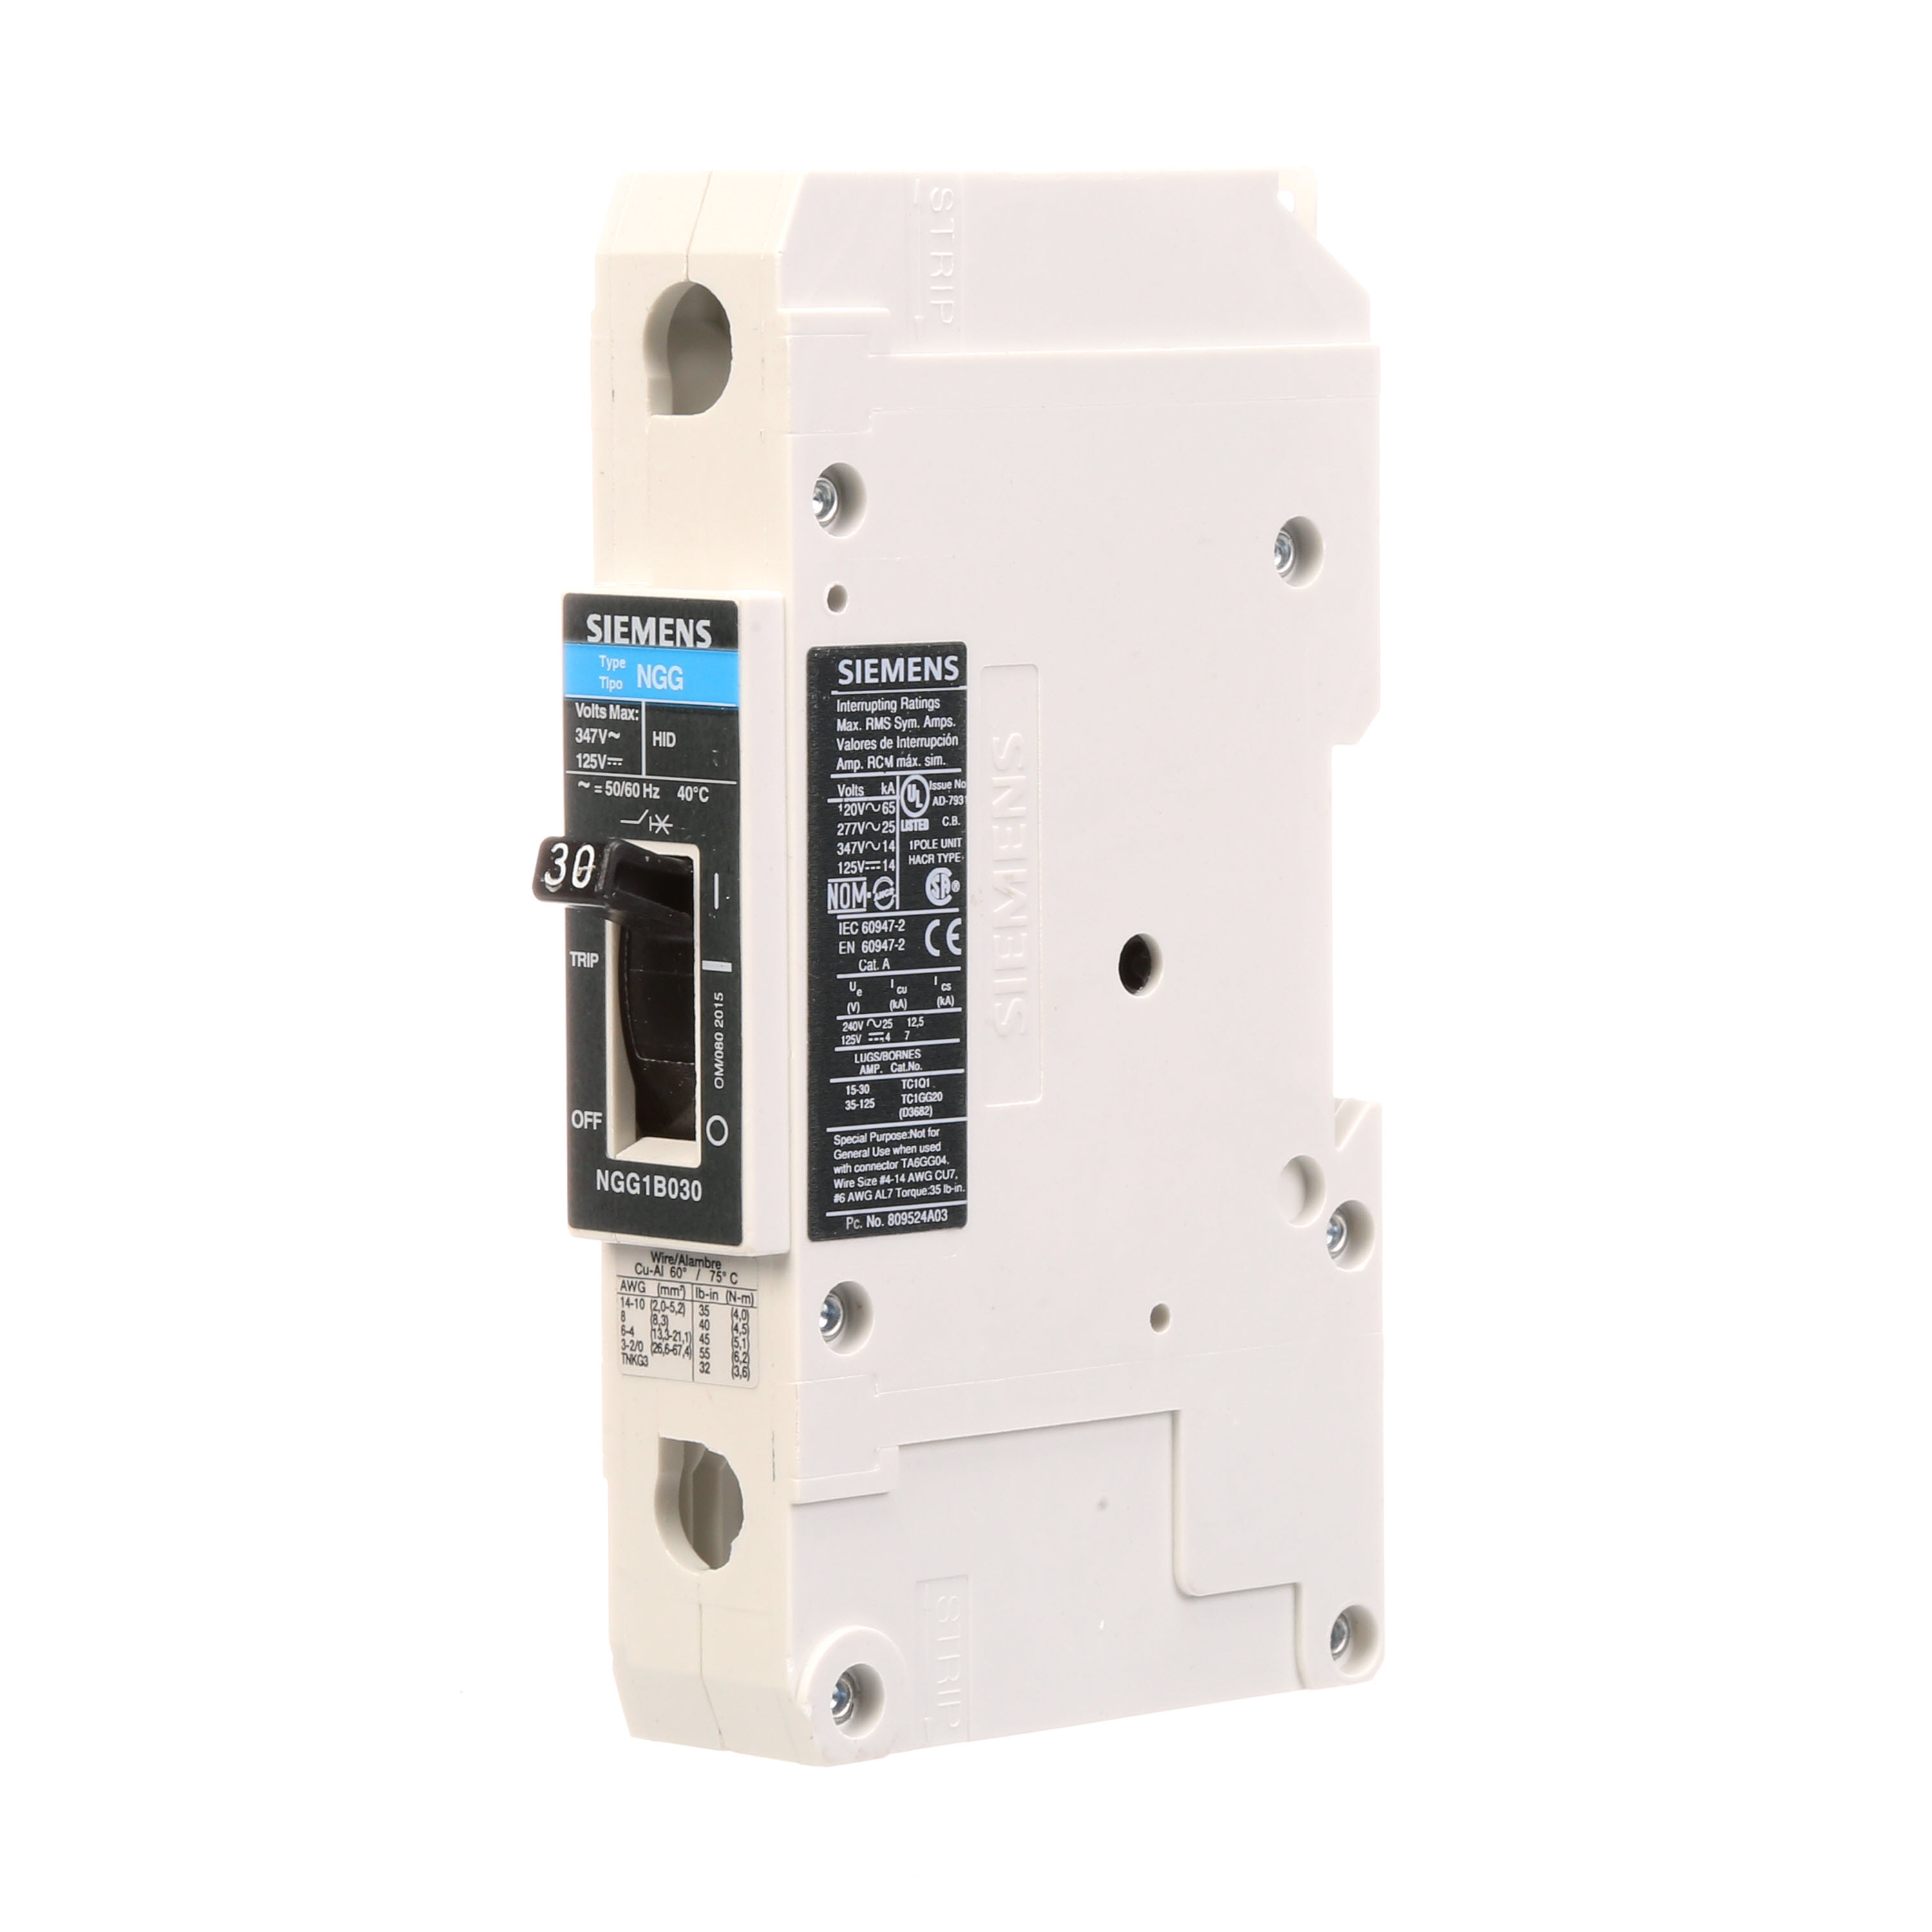 SIEMENS LOW VOLTAGE G FRAME CIRCUIT BREAKER WITH THERMAL - MAGNETIC TRIP. UL LISTED NGG FRAME WITH STANDARD BREAKING CAPACITY. 30A 1-POLE (14KAIC AT 347V) (25KAIC AT 277V). SPECIAL FEATURES MOUNTS ON DIN RAIL / SCREW, NO LUGS. DIMENSIONS (W x H x D) IN 1 x 5.4 x 2.8.